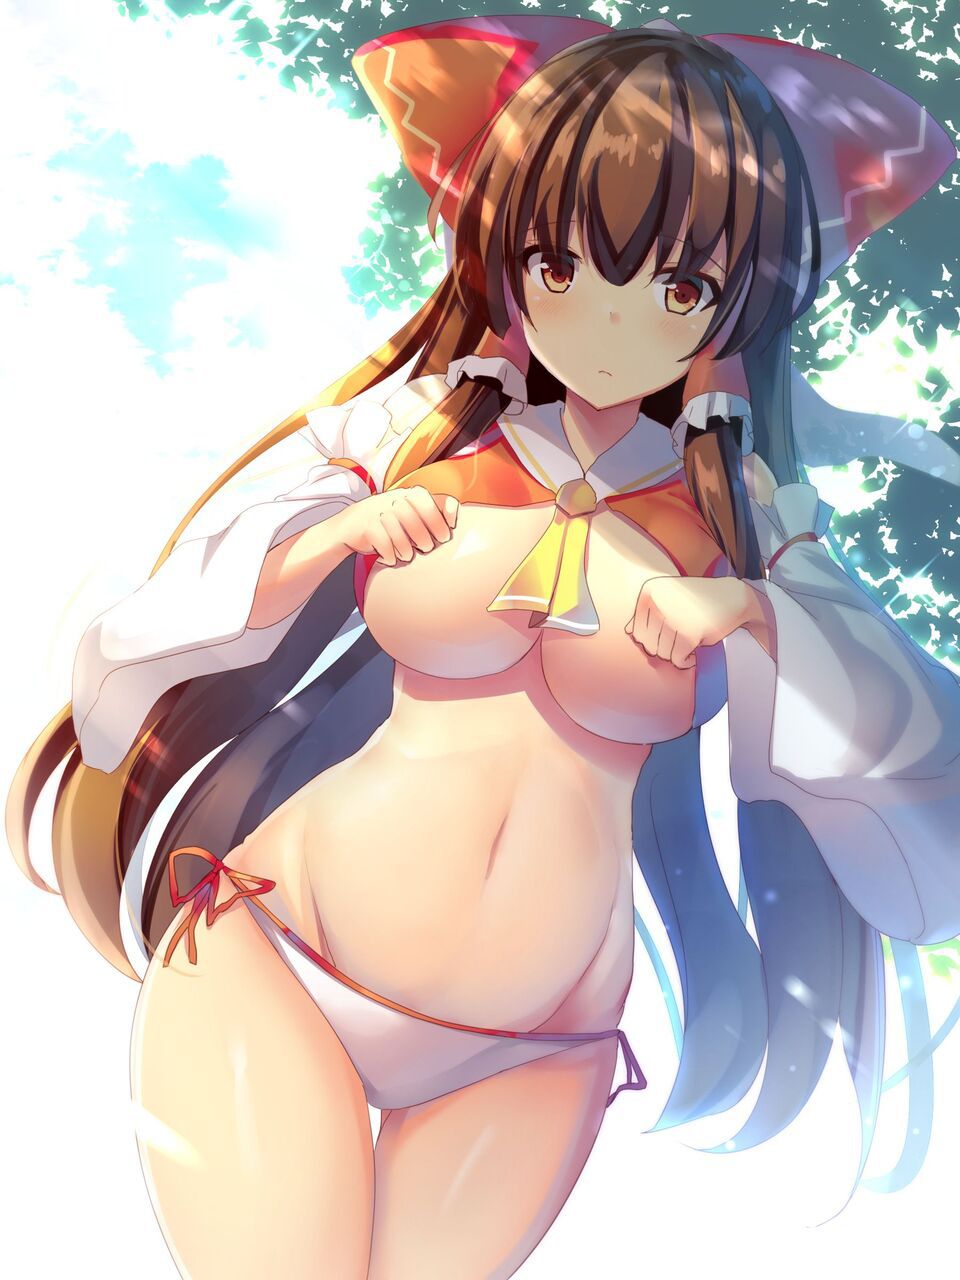 【Shrine maiden】I have never seen it except new year, so I will post an image of the shrine maiden Part 2 27